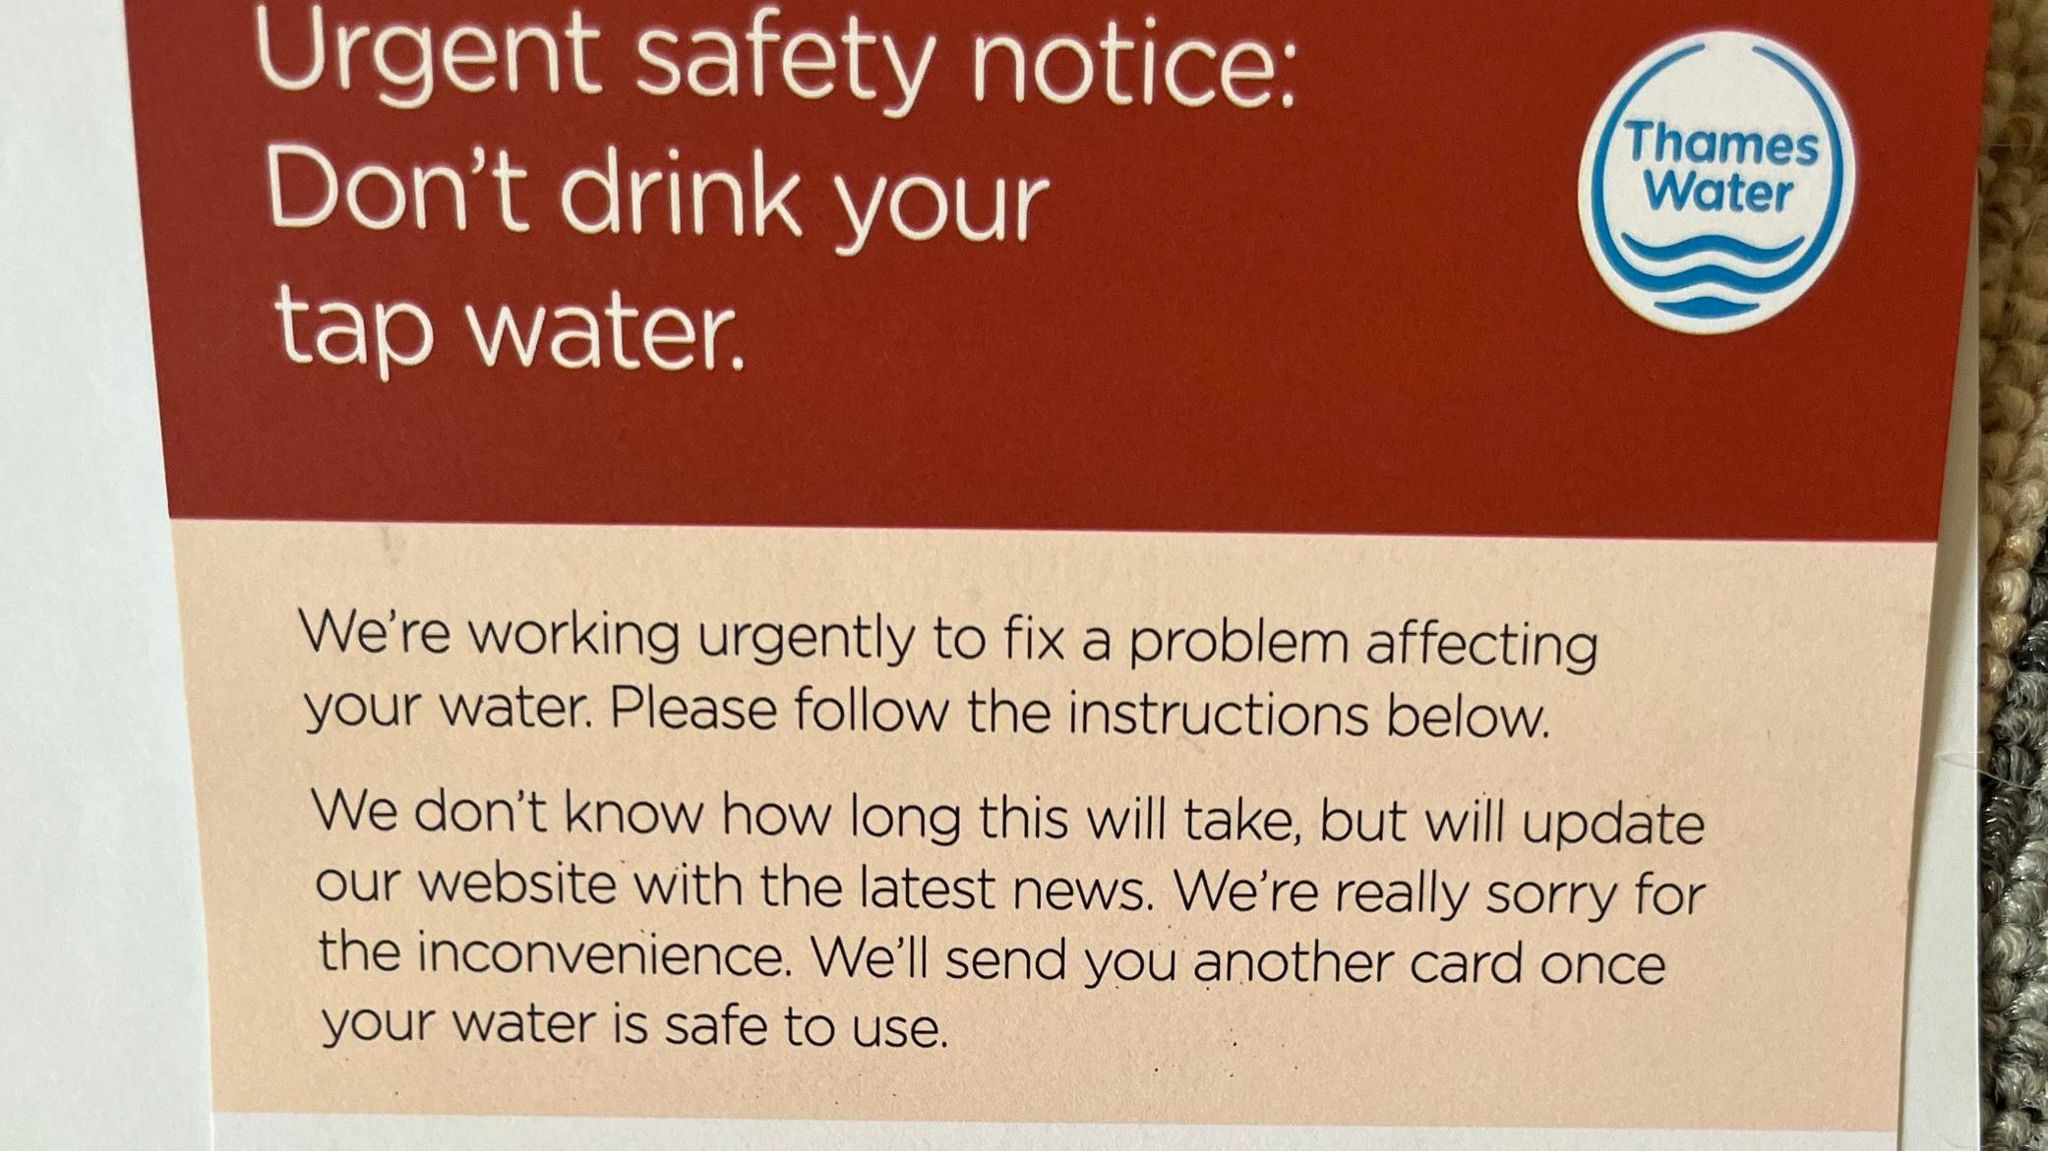 Sign warning people in Bramley not to drink their tap water